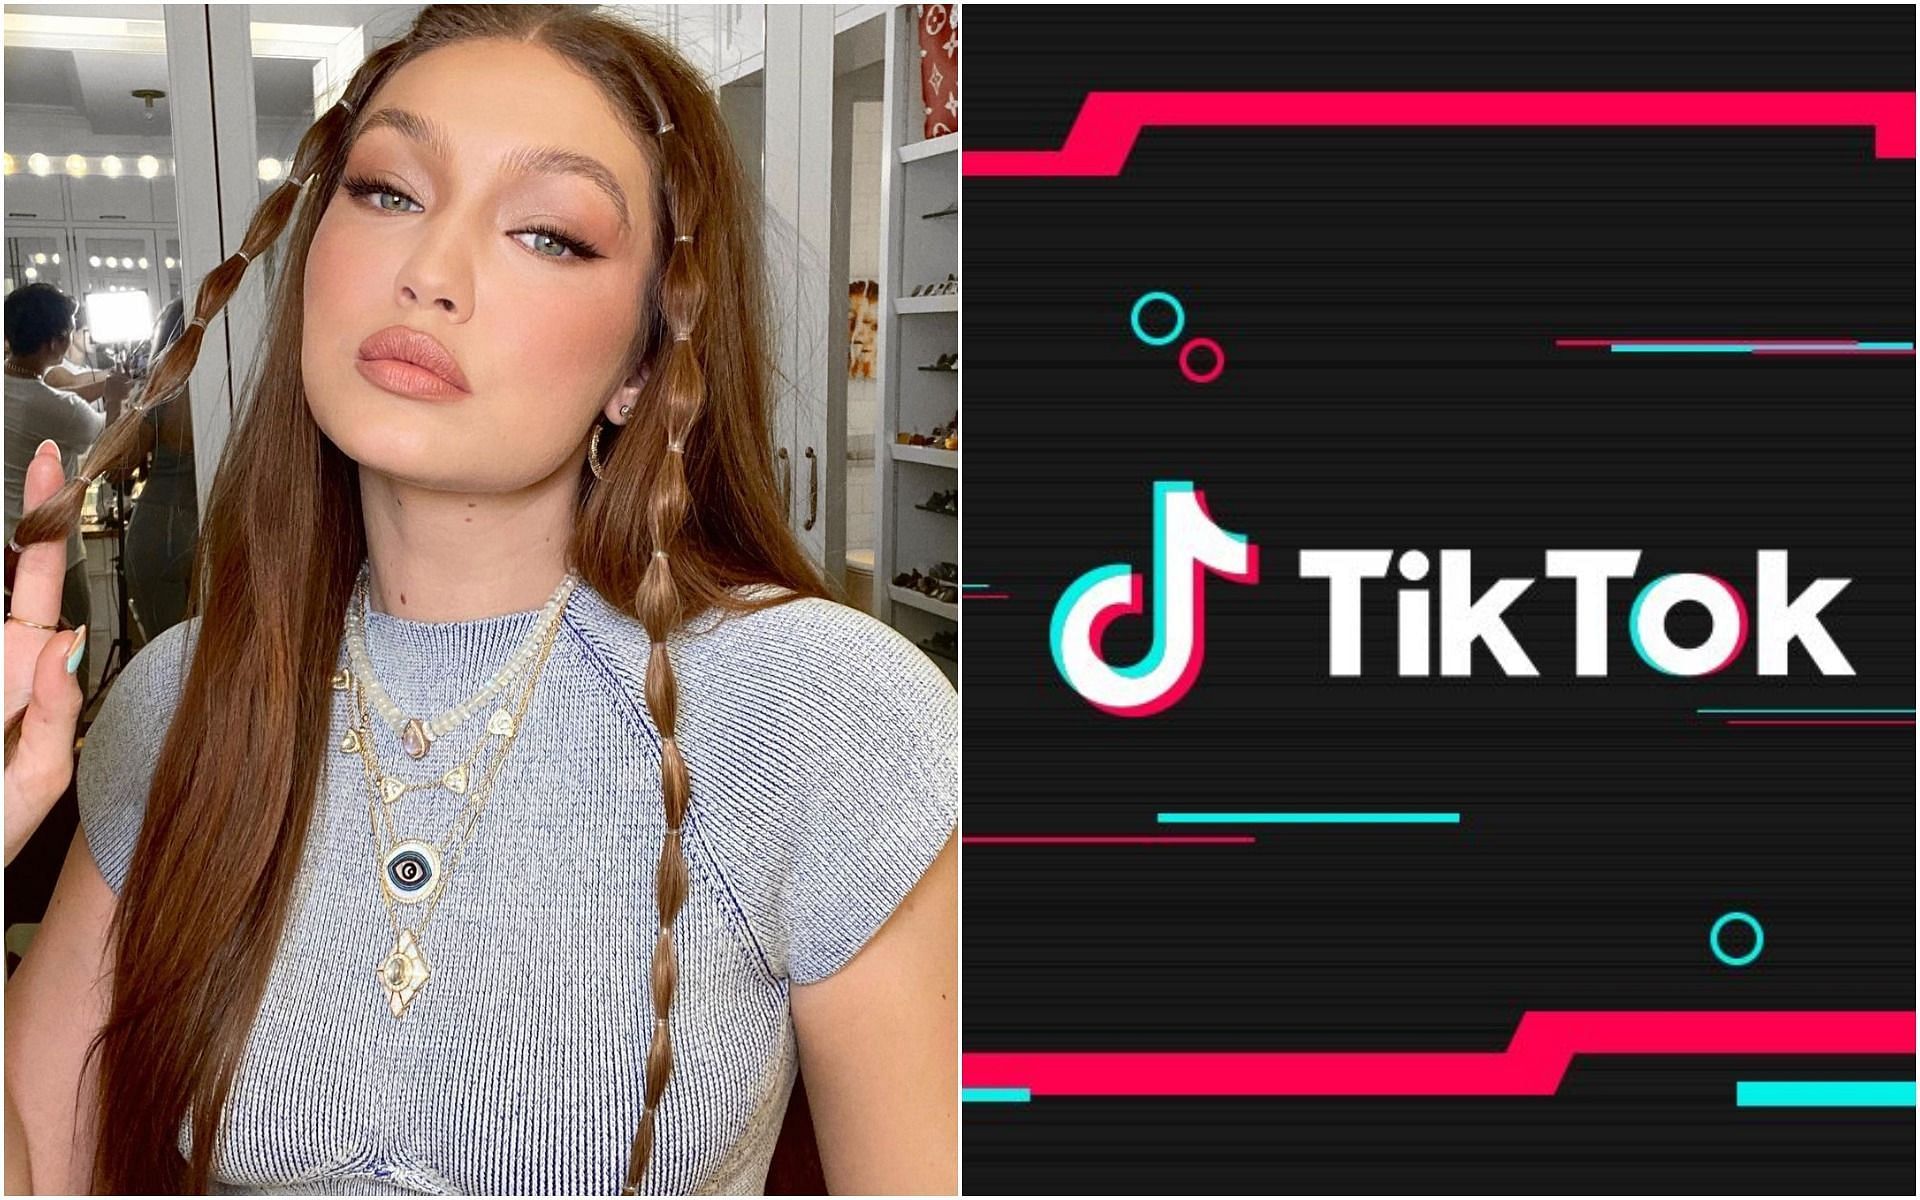 Gigi Hadid admits to using TikTok only to watch mom and cleaning videos (Image via Instagram/@gigihadid and Facebook/@tiktok)